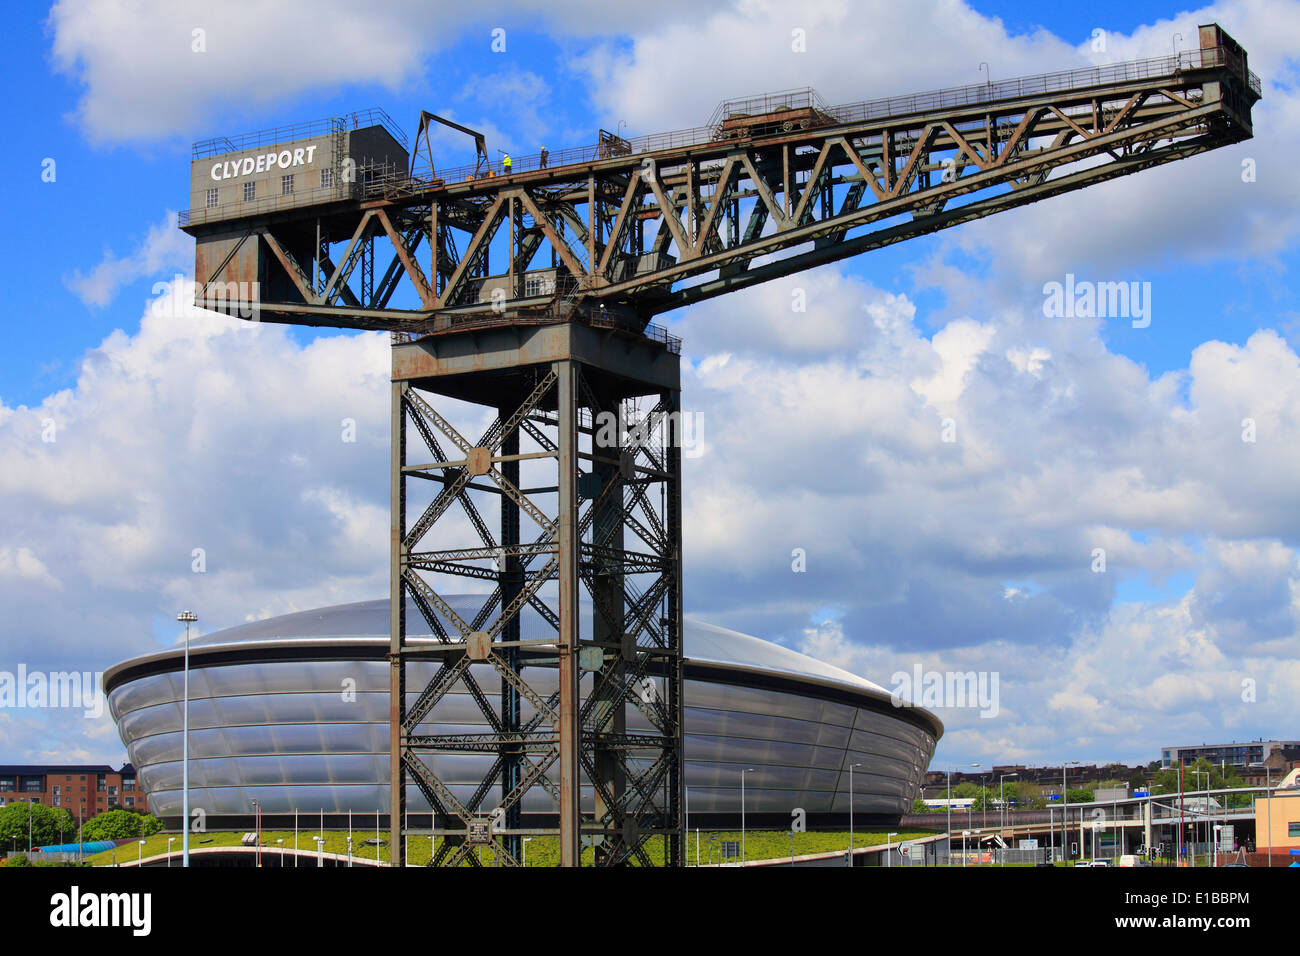 Royaume-uni, Ecosse, Glasgow, Hydro Arena, Clydeport Crane, Banque D'Images